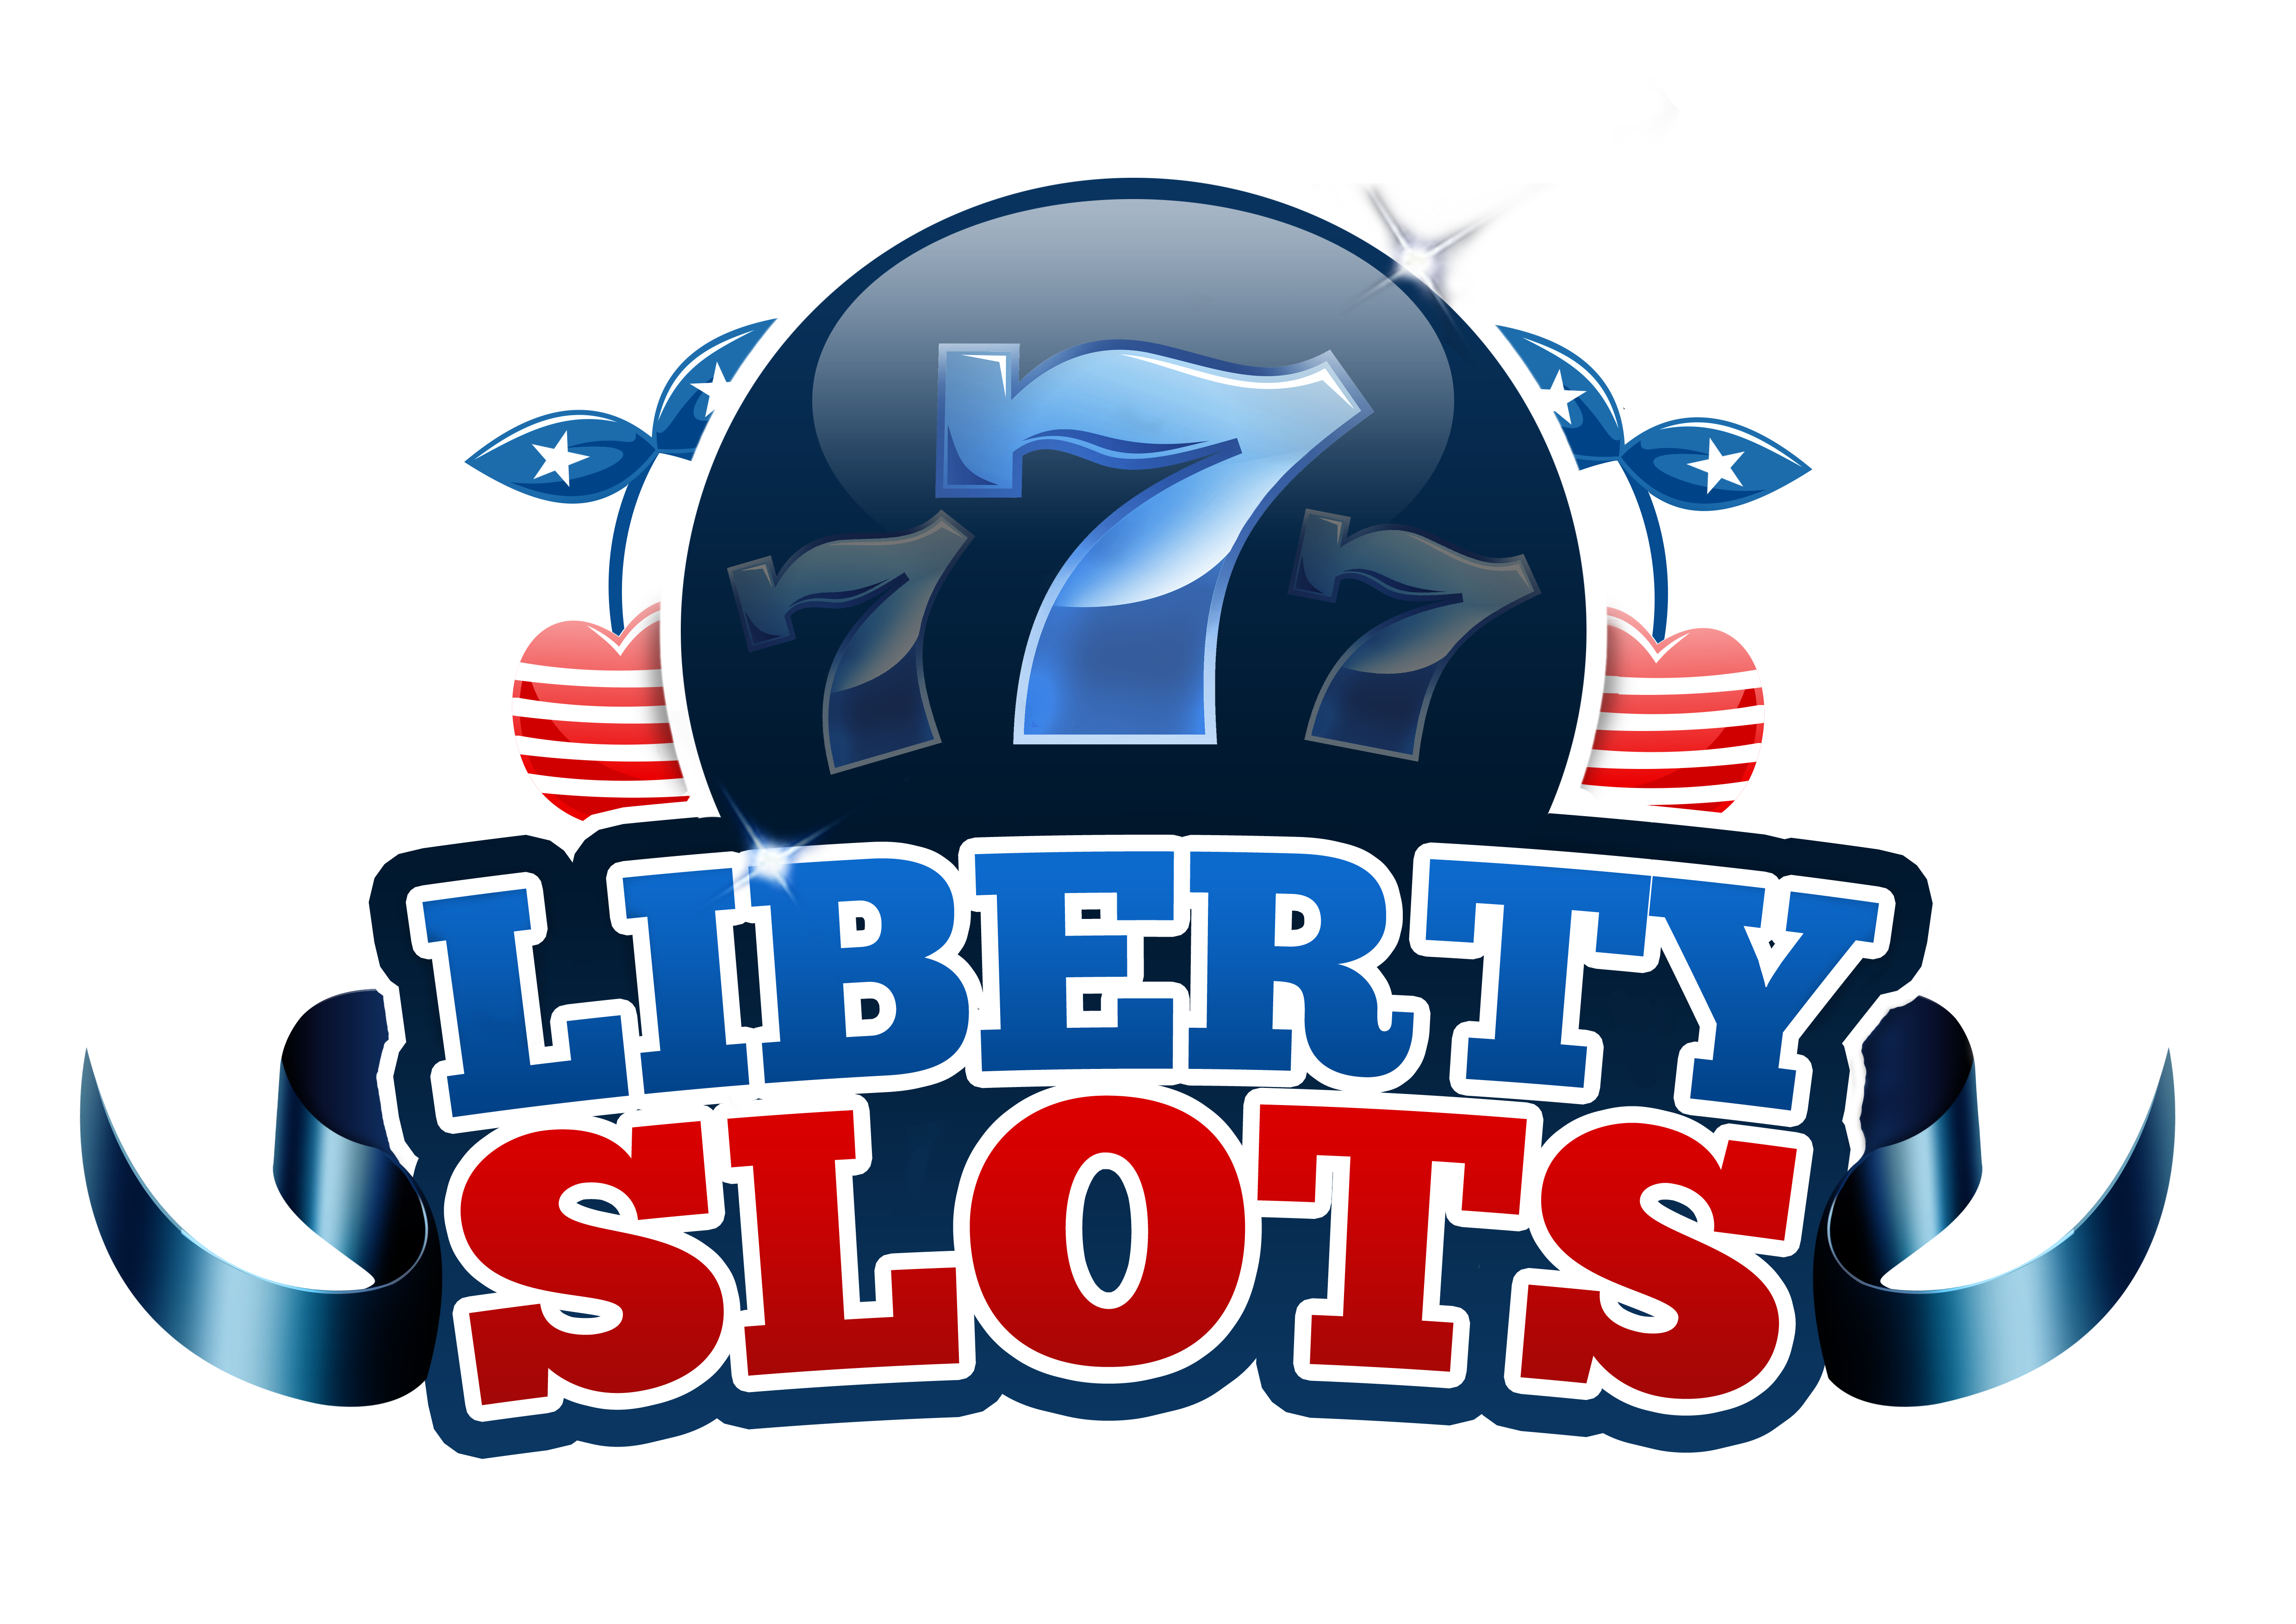 Compete in the Whitewalls Tournament at LibertySlots: Claim Victory and Prizes!